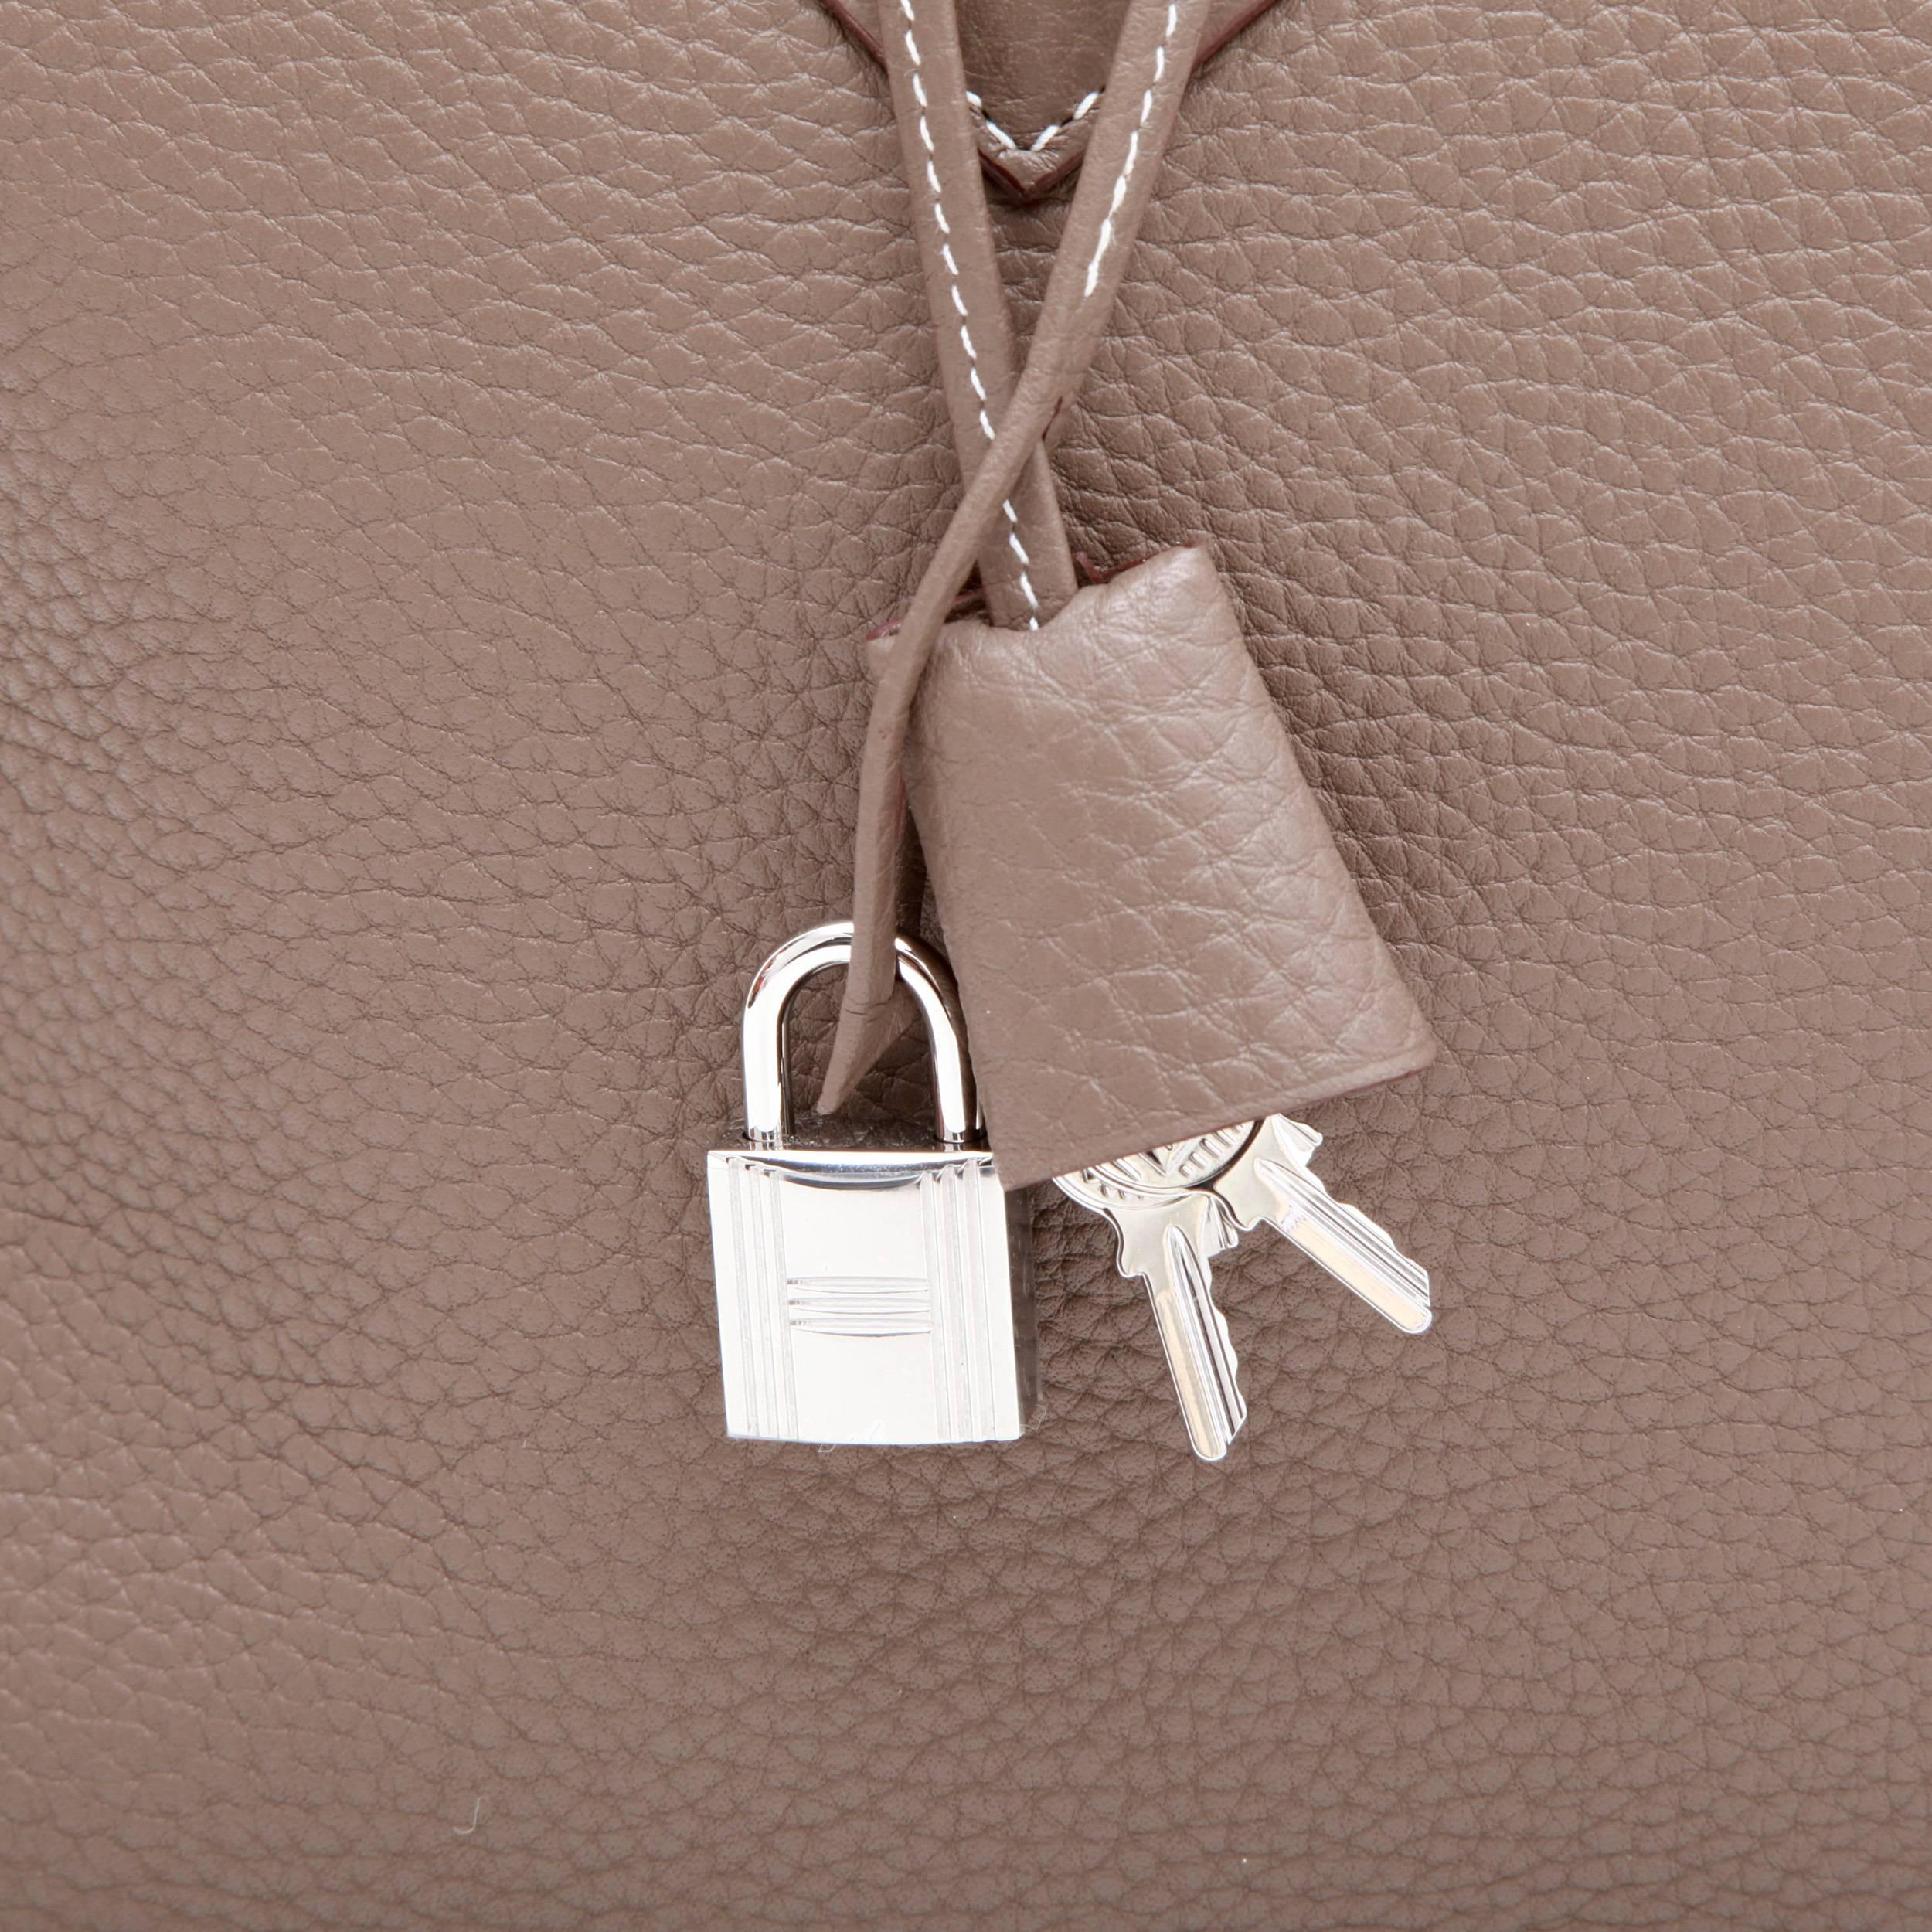 Brown Hermes Victoria Bag in Etoupe Clémence Taurillon Leather and Saddle Stitching